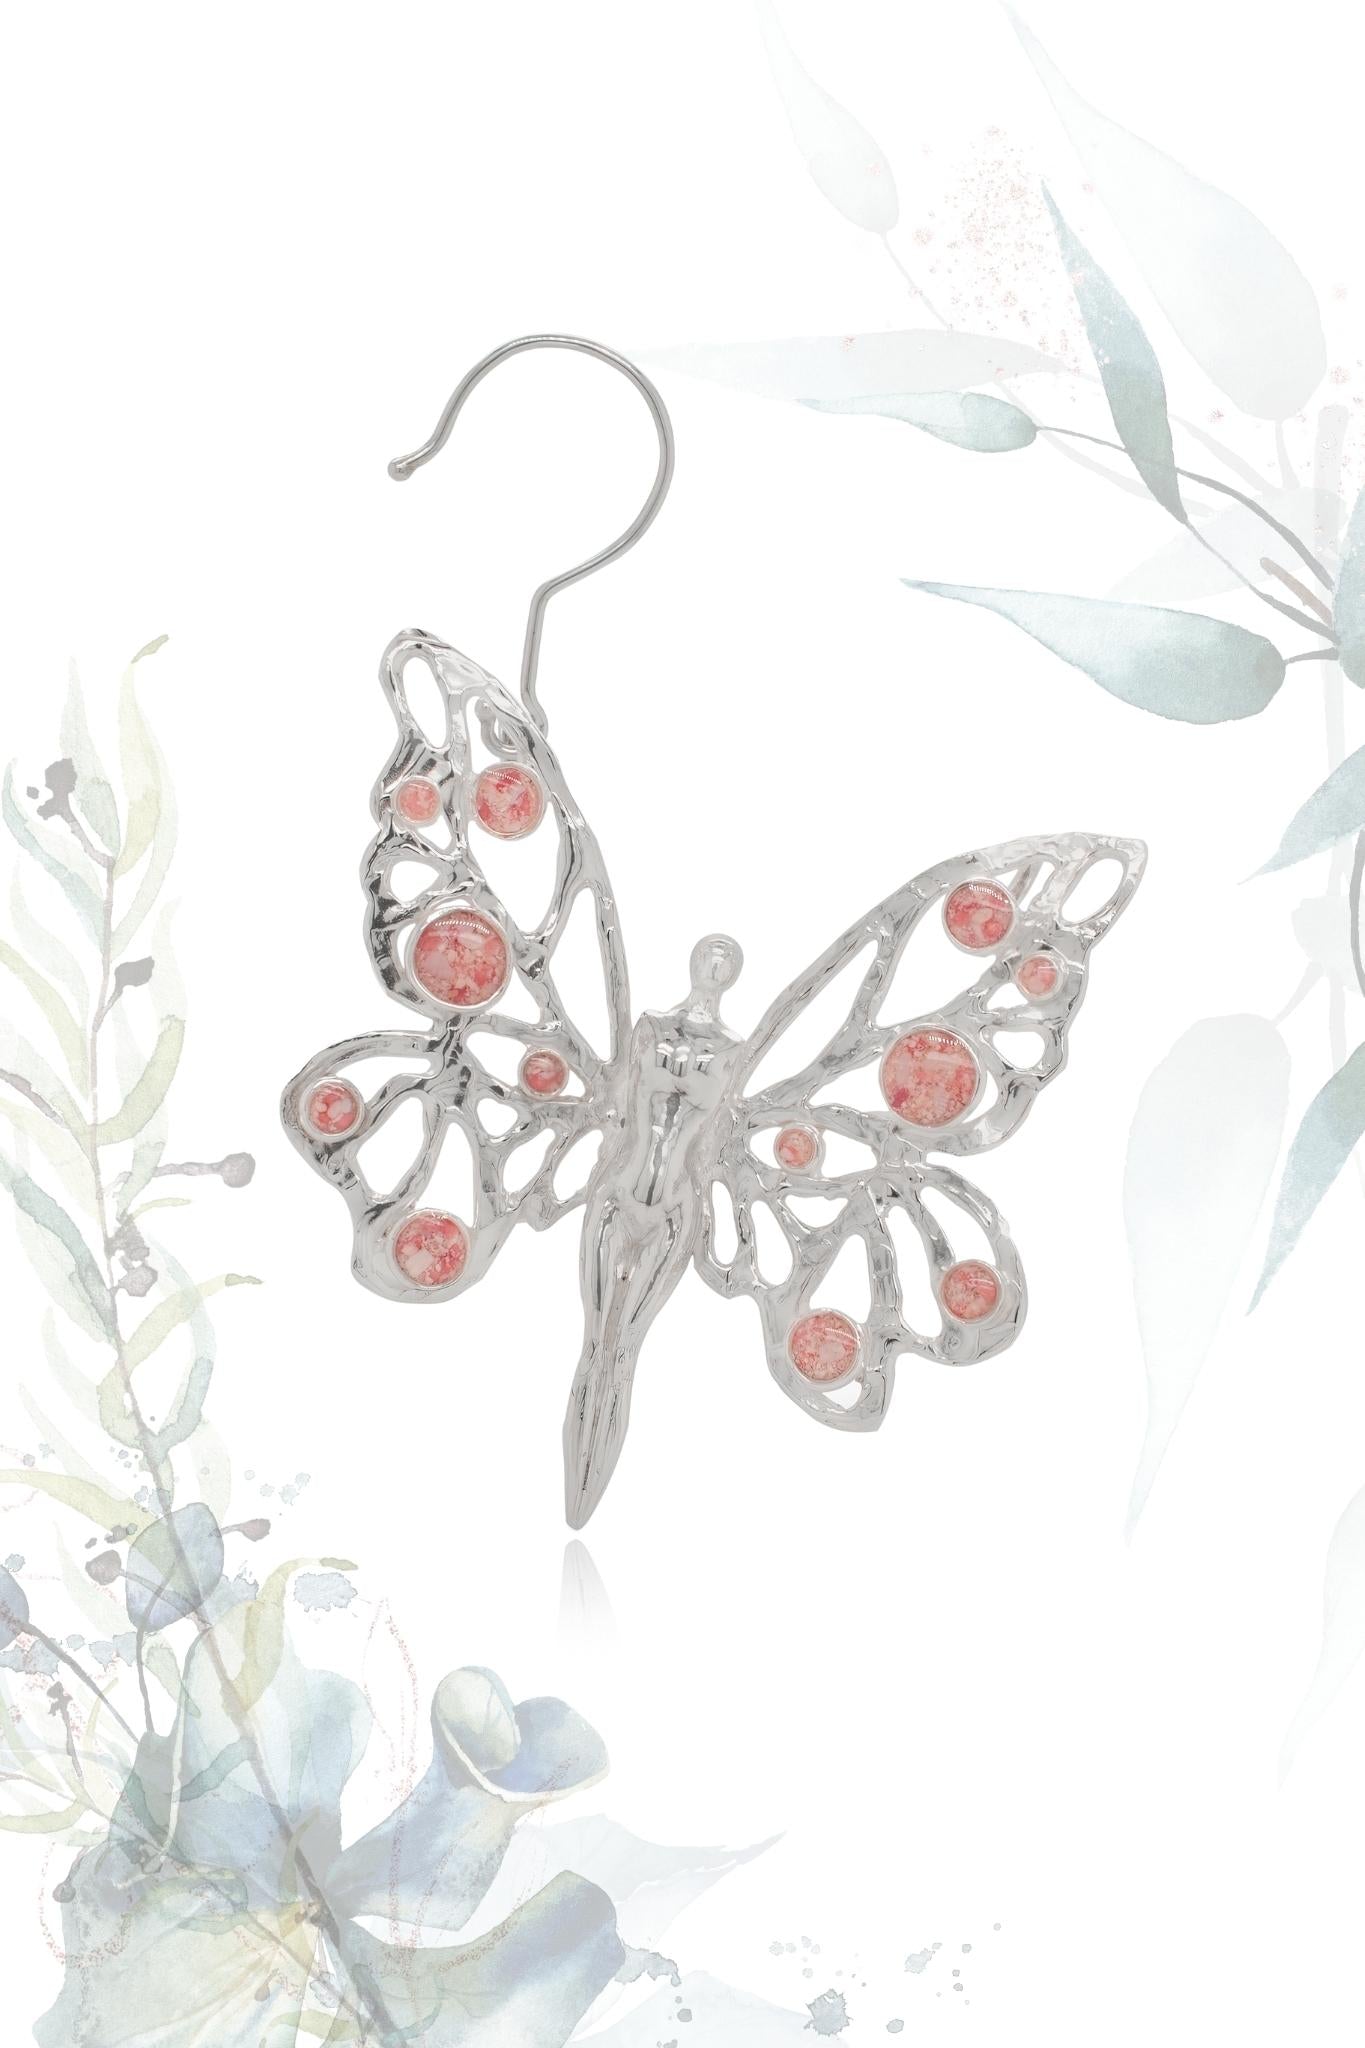 Butterfly ~ 2021 Ornament/Pendant